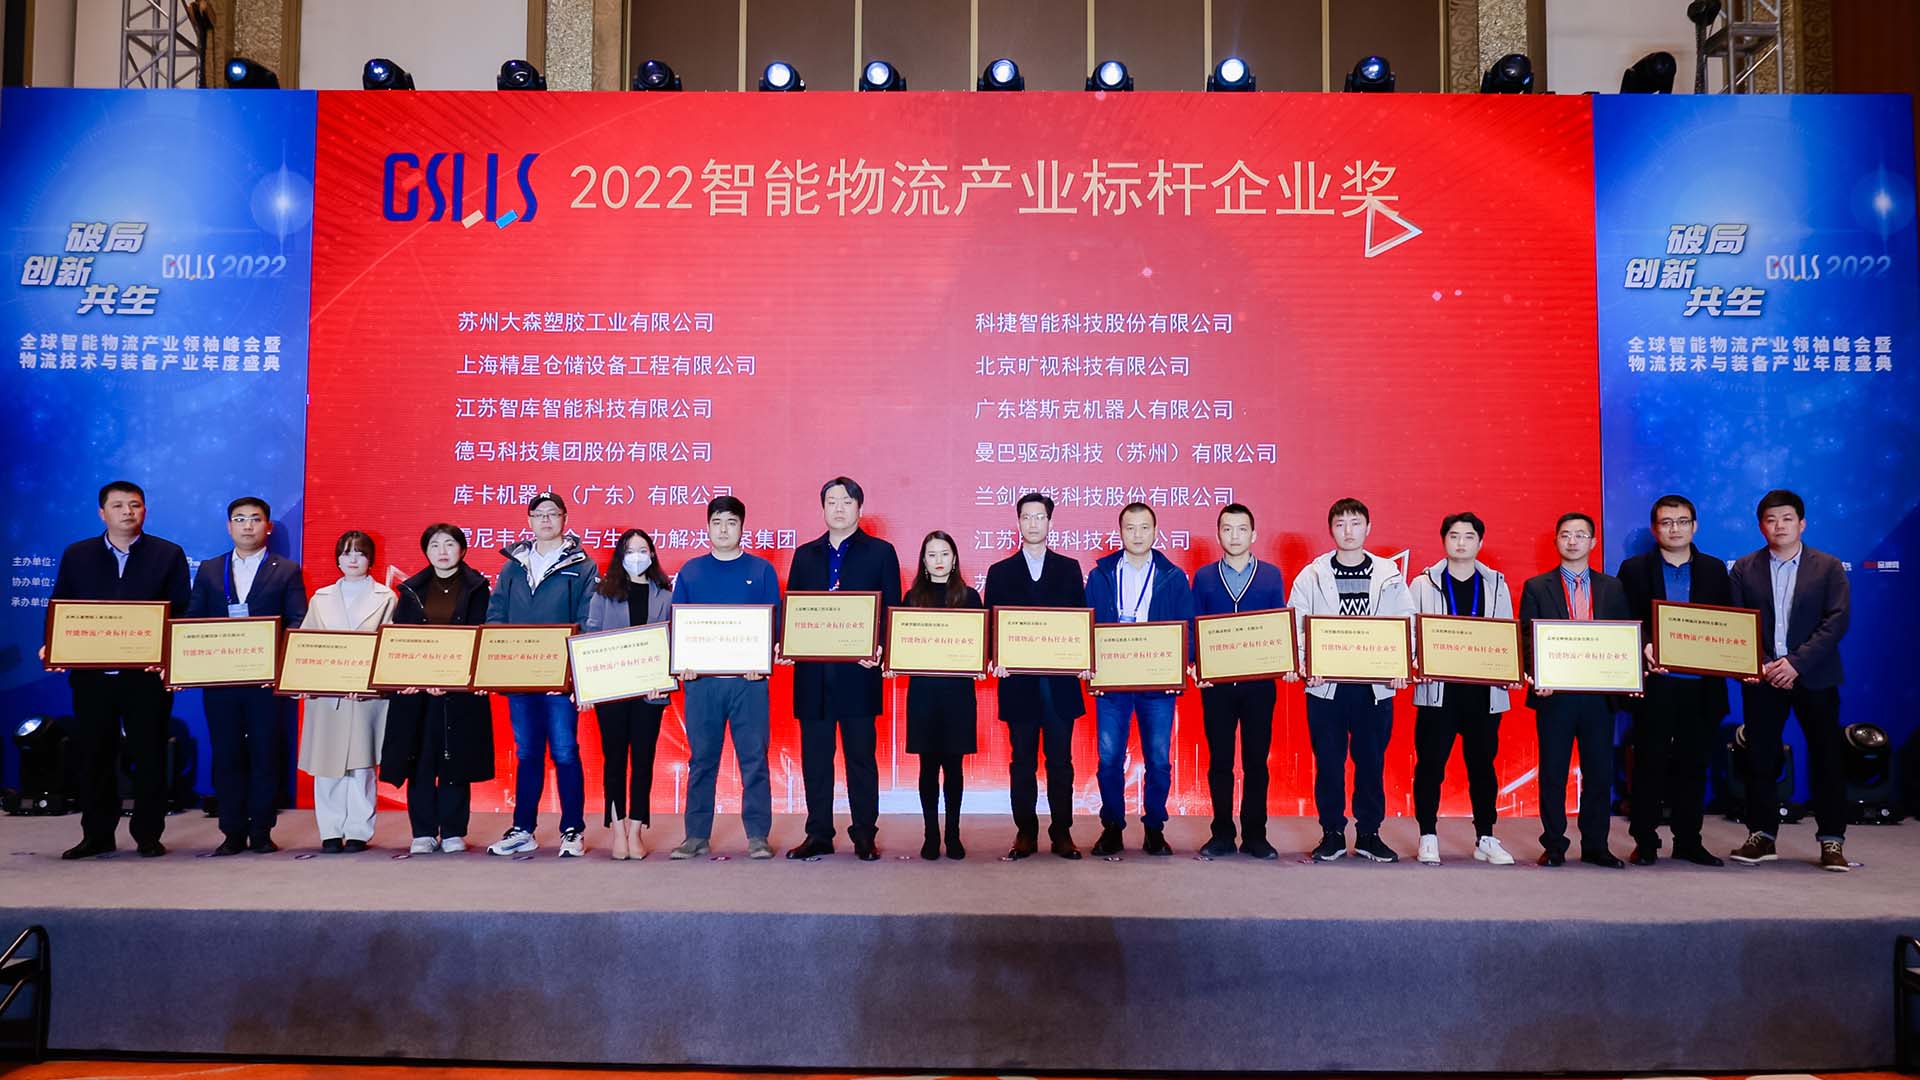 GINFON was invited to participate in the "2022 Global Intelligent Logistics Industry Leaders Summit and Annual Ceremony of Logistics Technology and Equipment Industry".